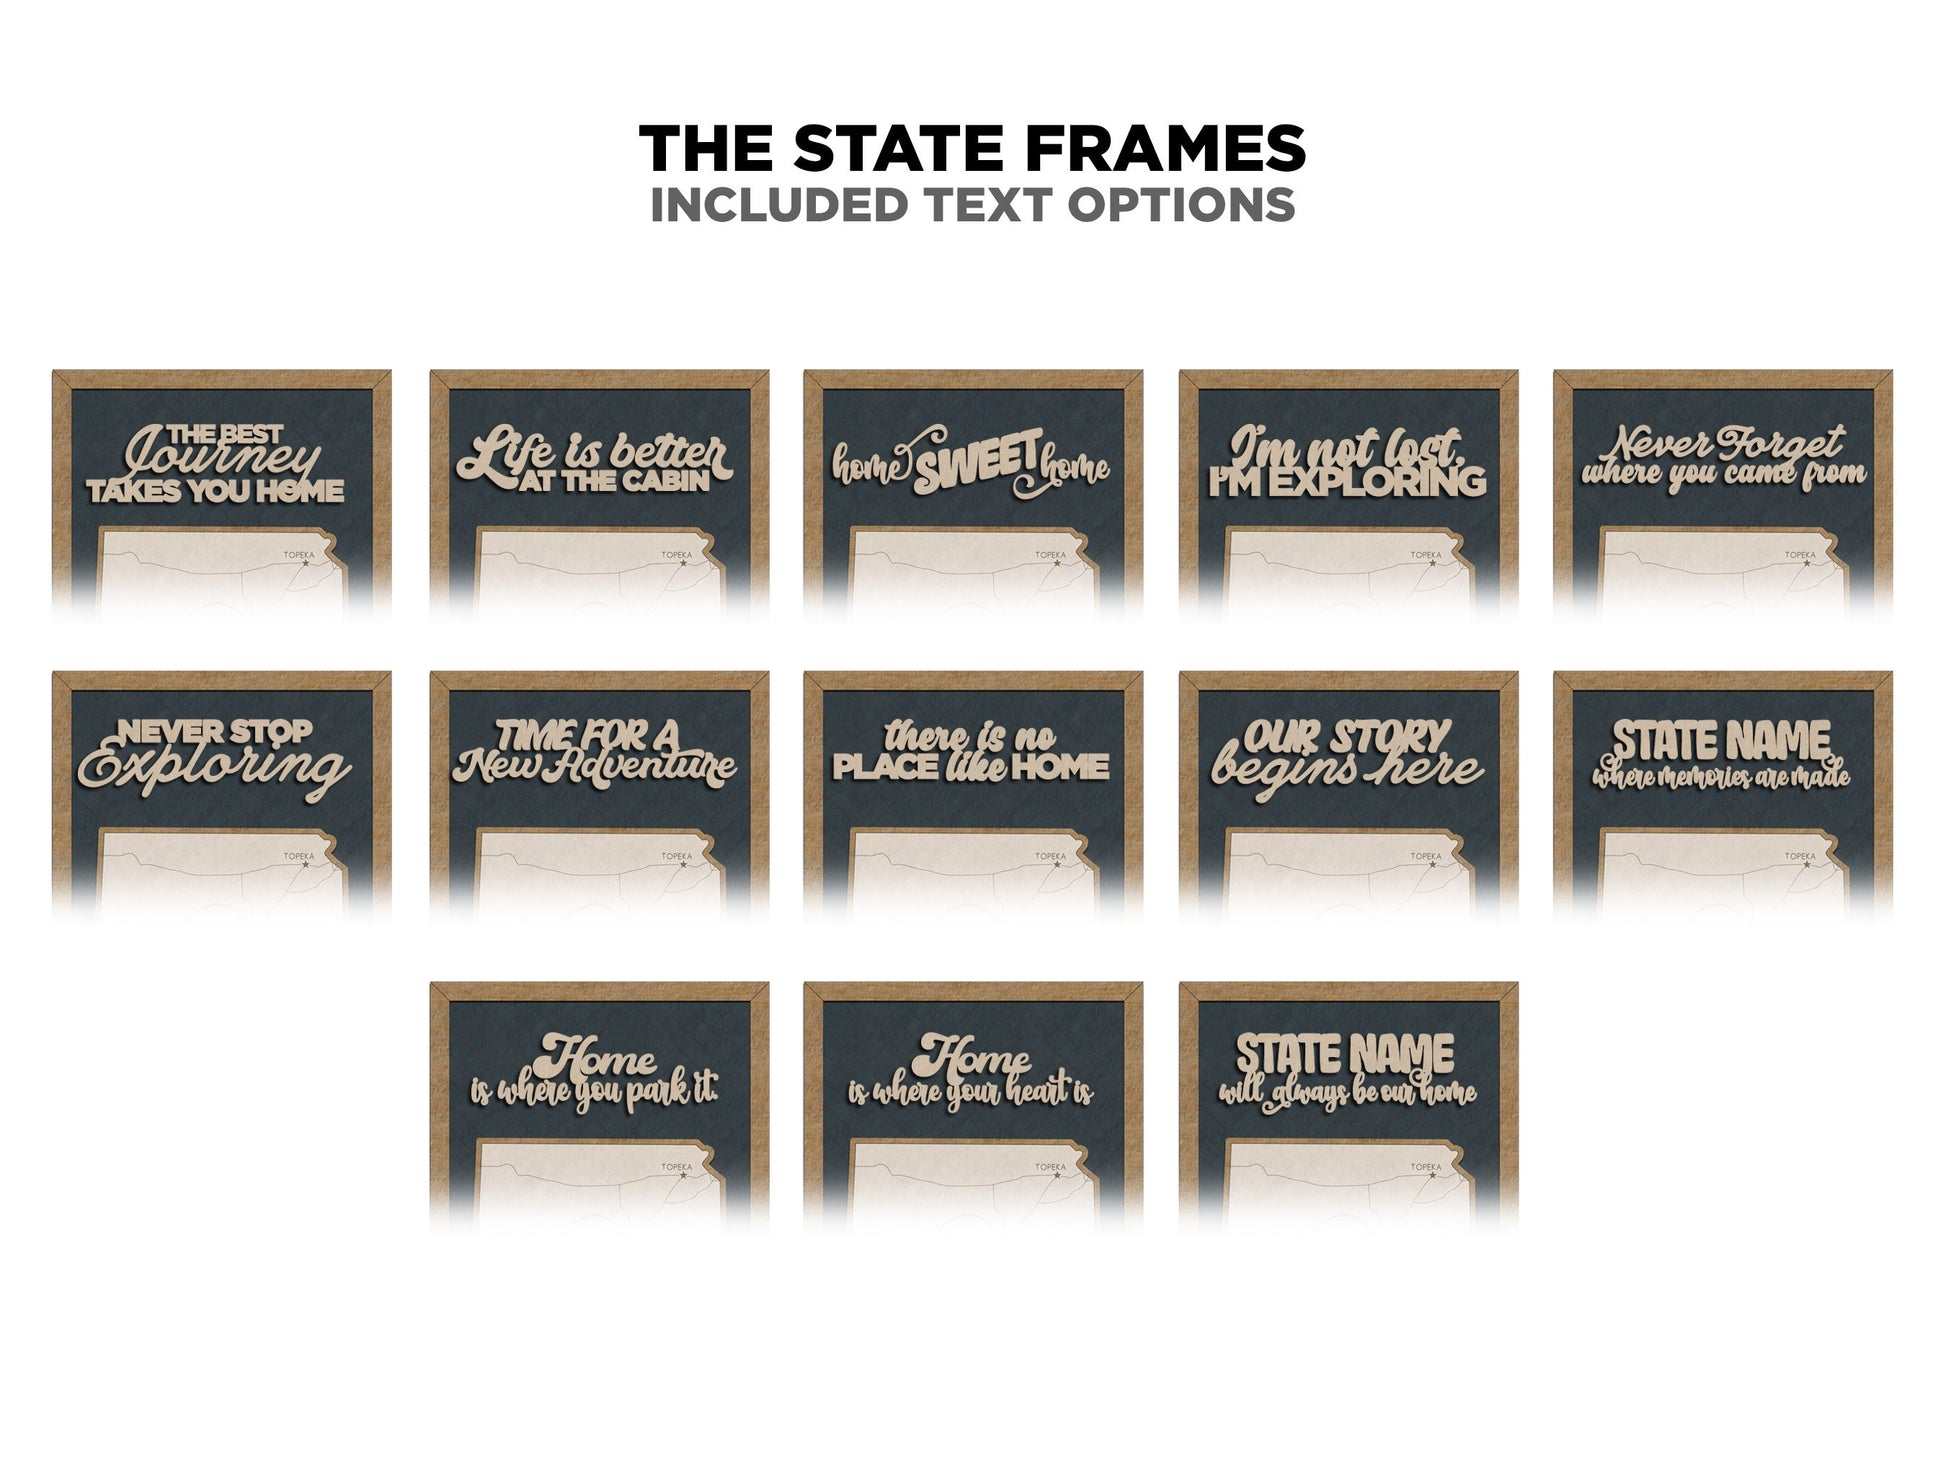 The Alaska State Frame - 13 text options, 12 backgrounds, 25 icons Included - Make over 7,500 designs - Glowforge & Lightburn Tested